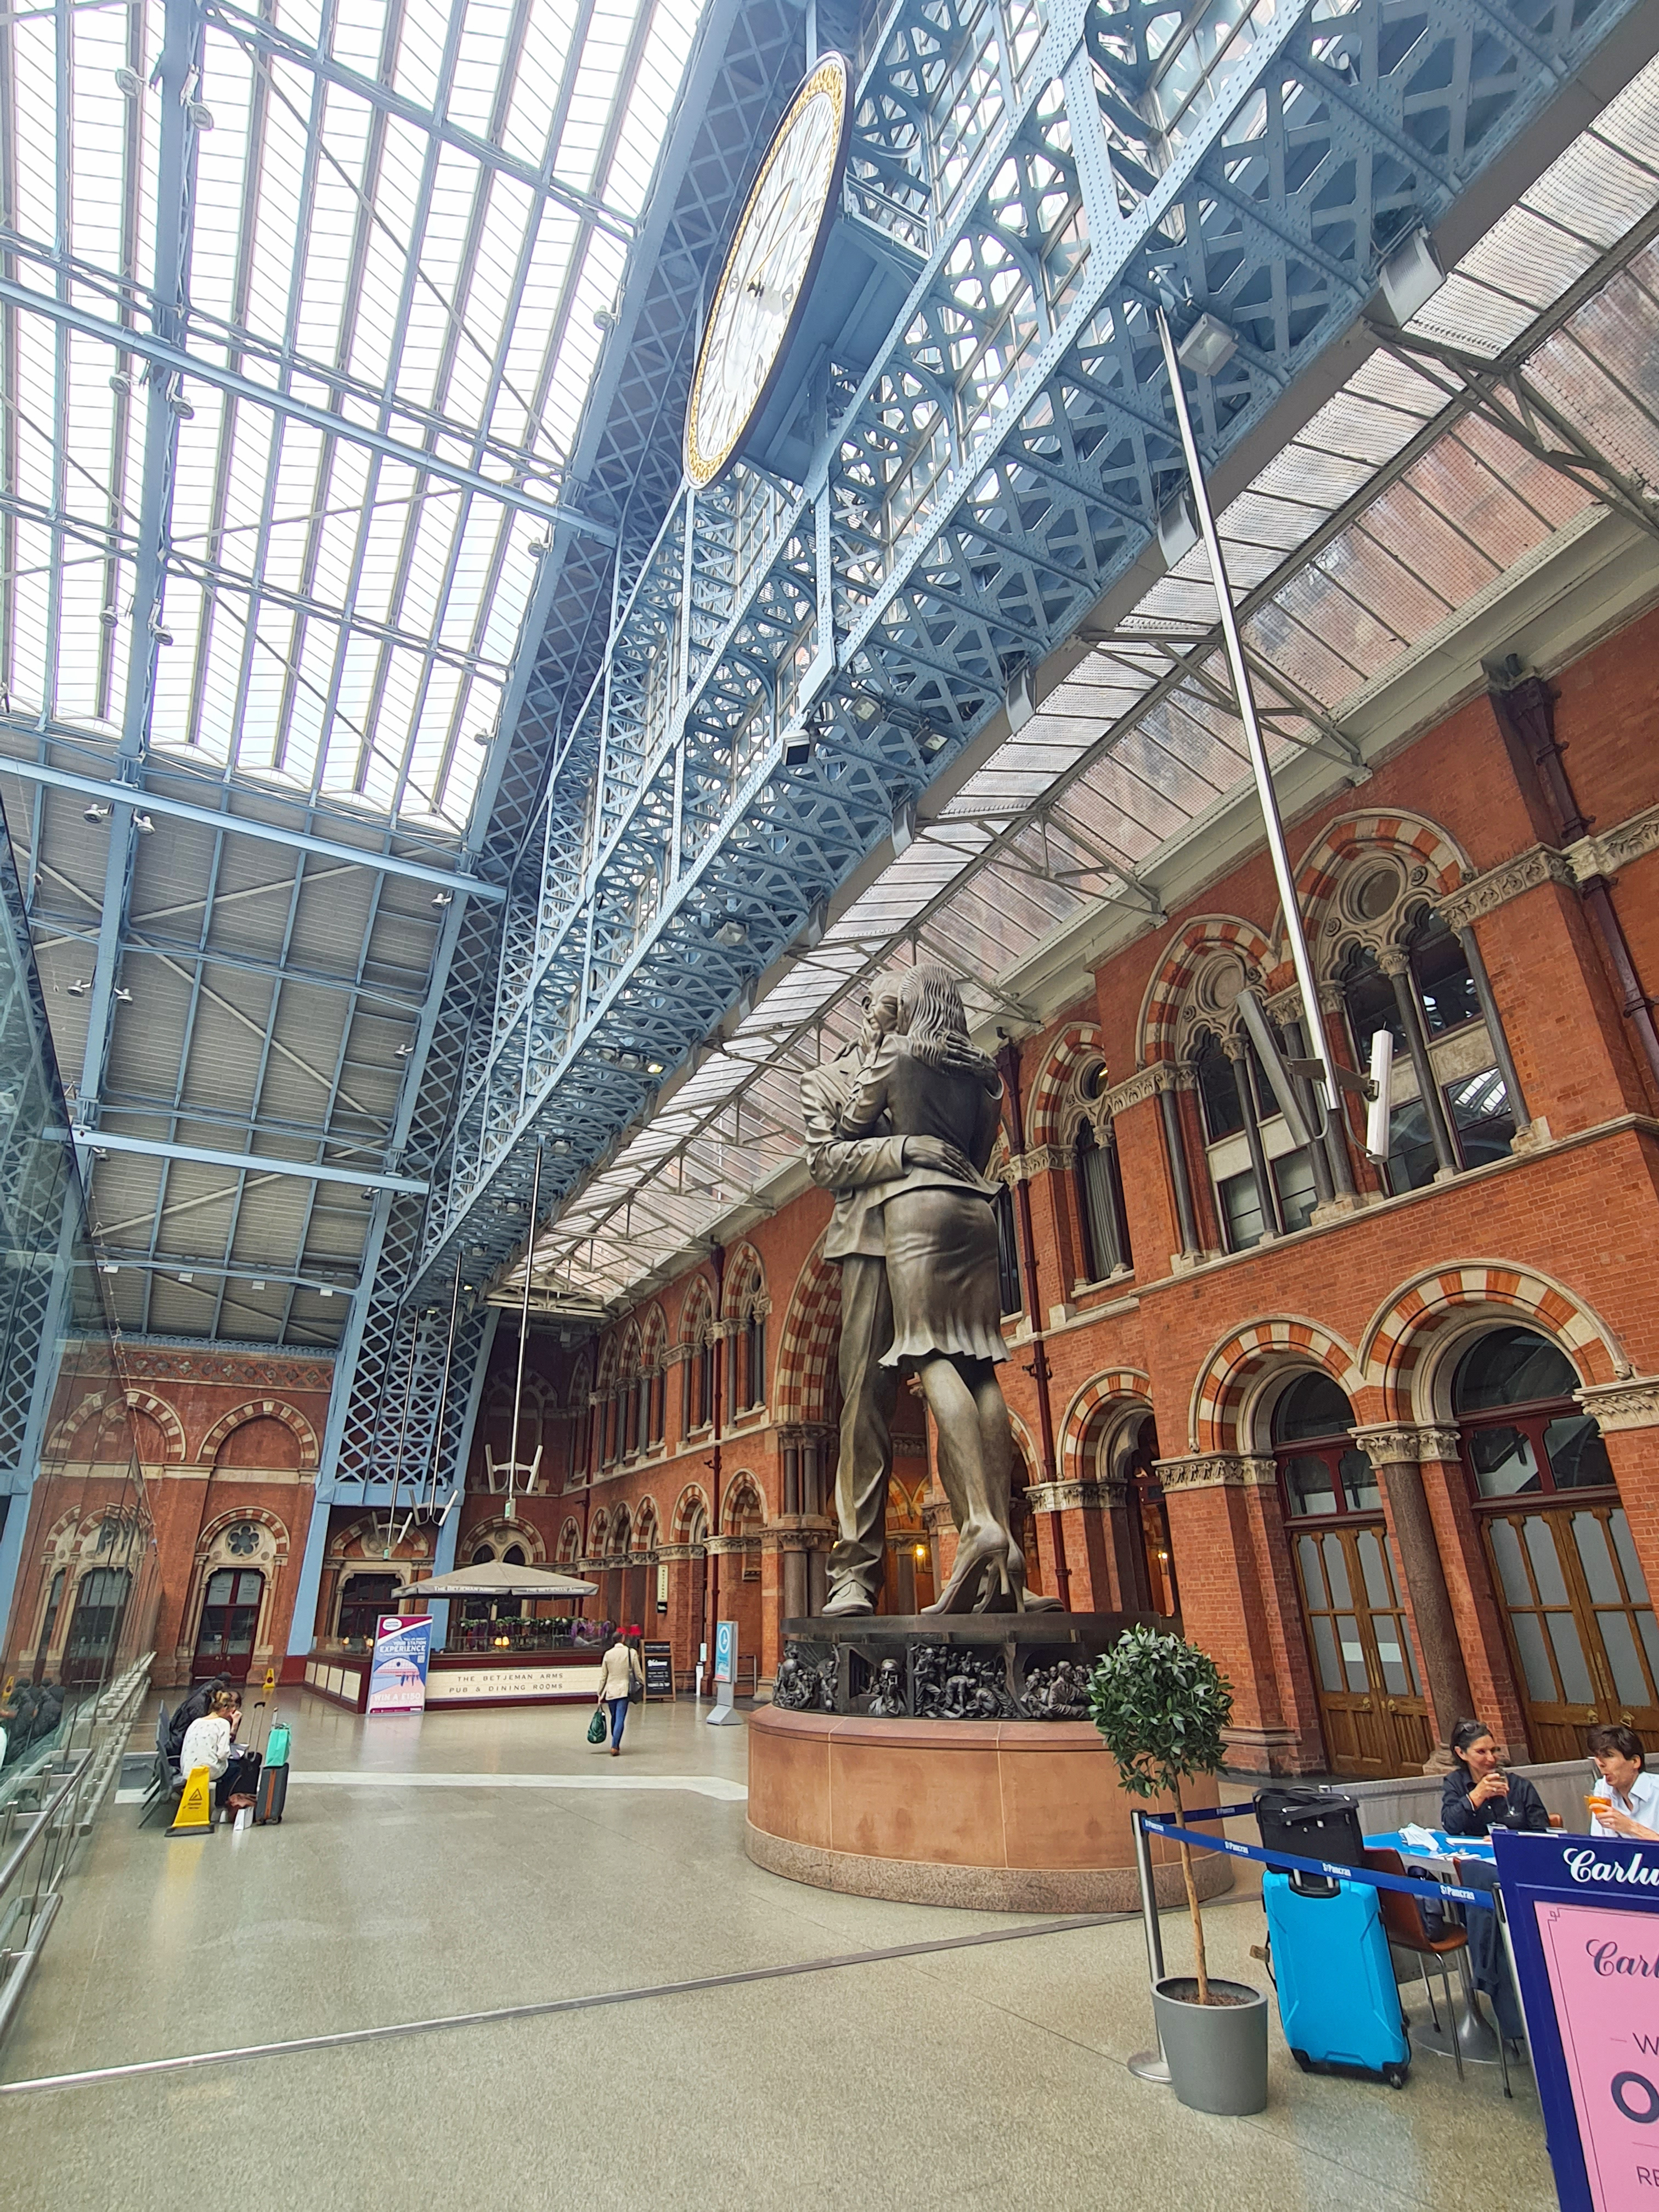 The Meeting Place, by Paul Day. St. Pancras Railway Station